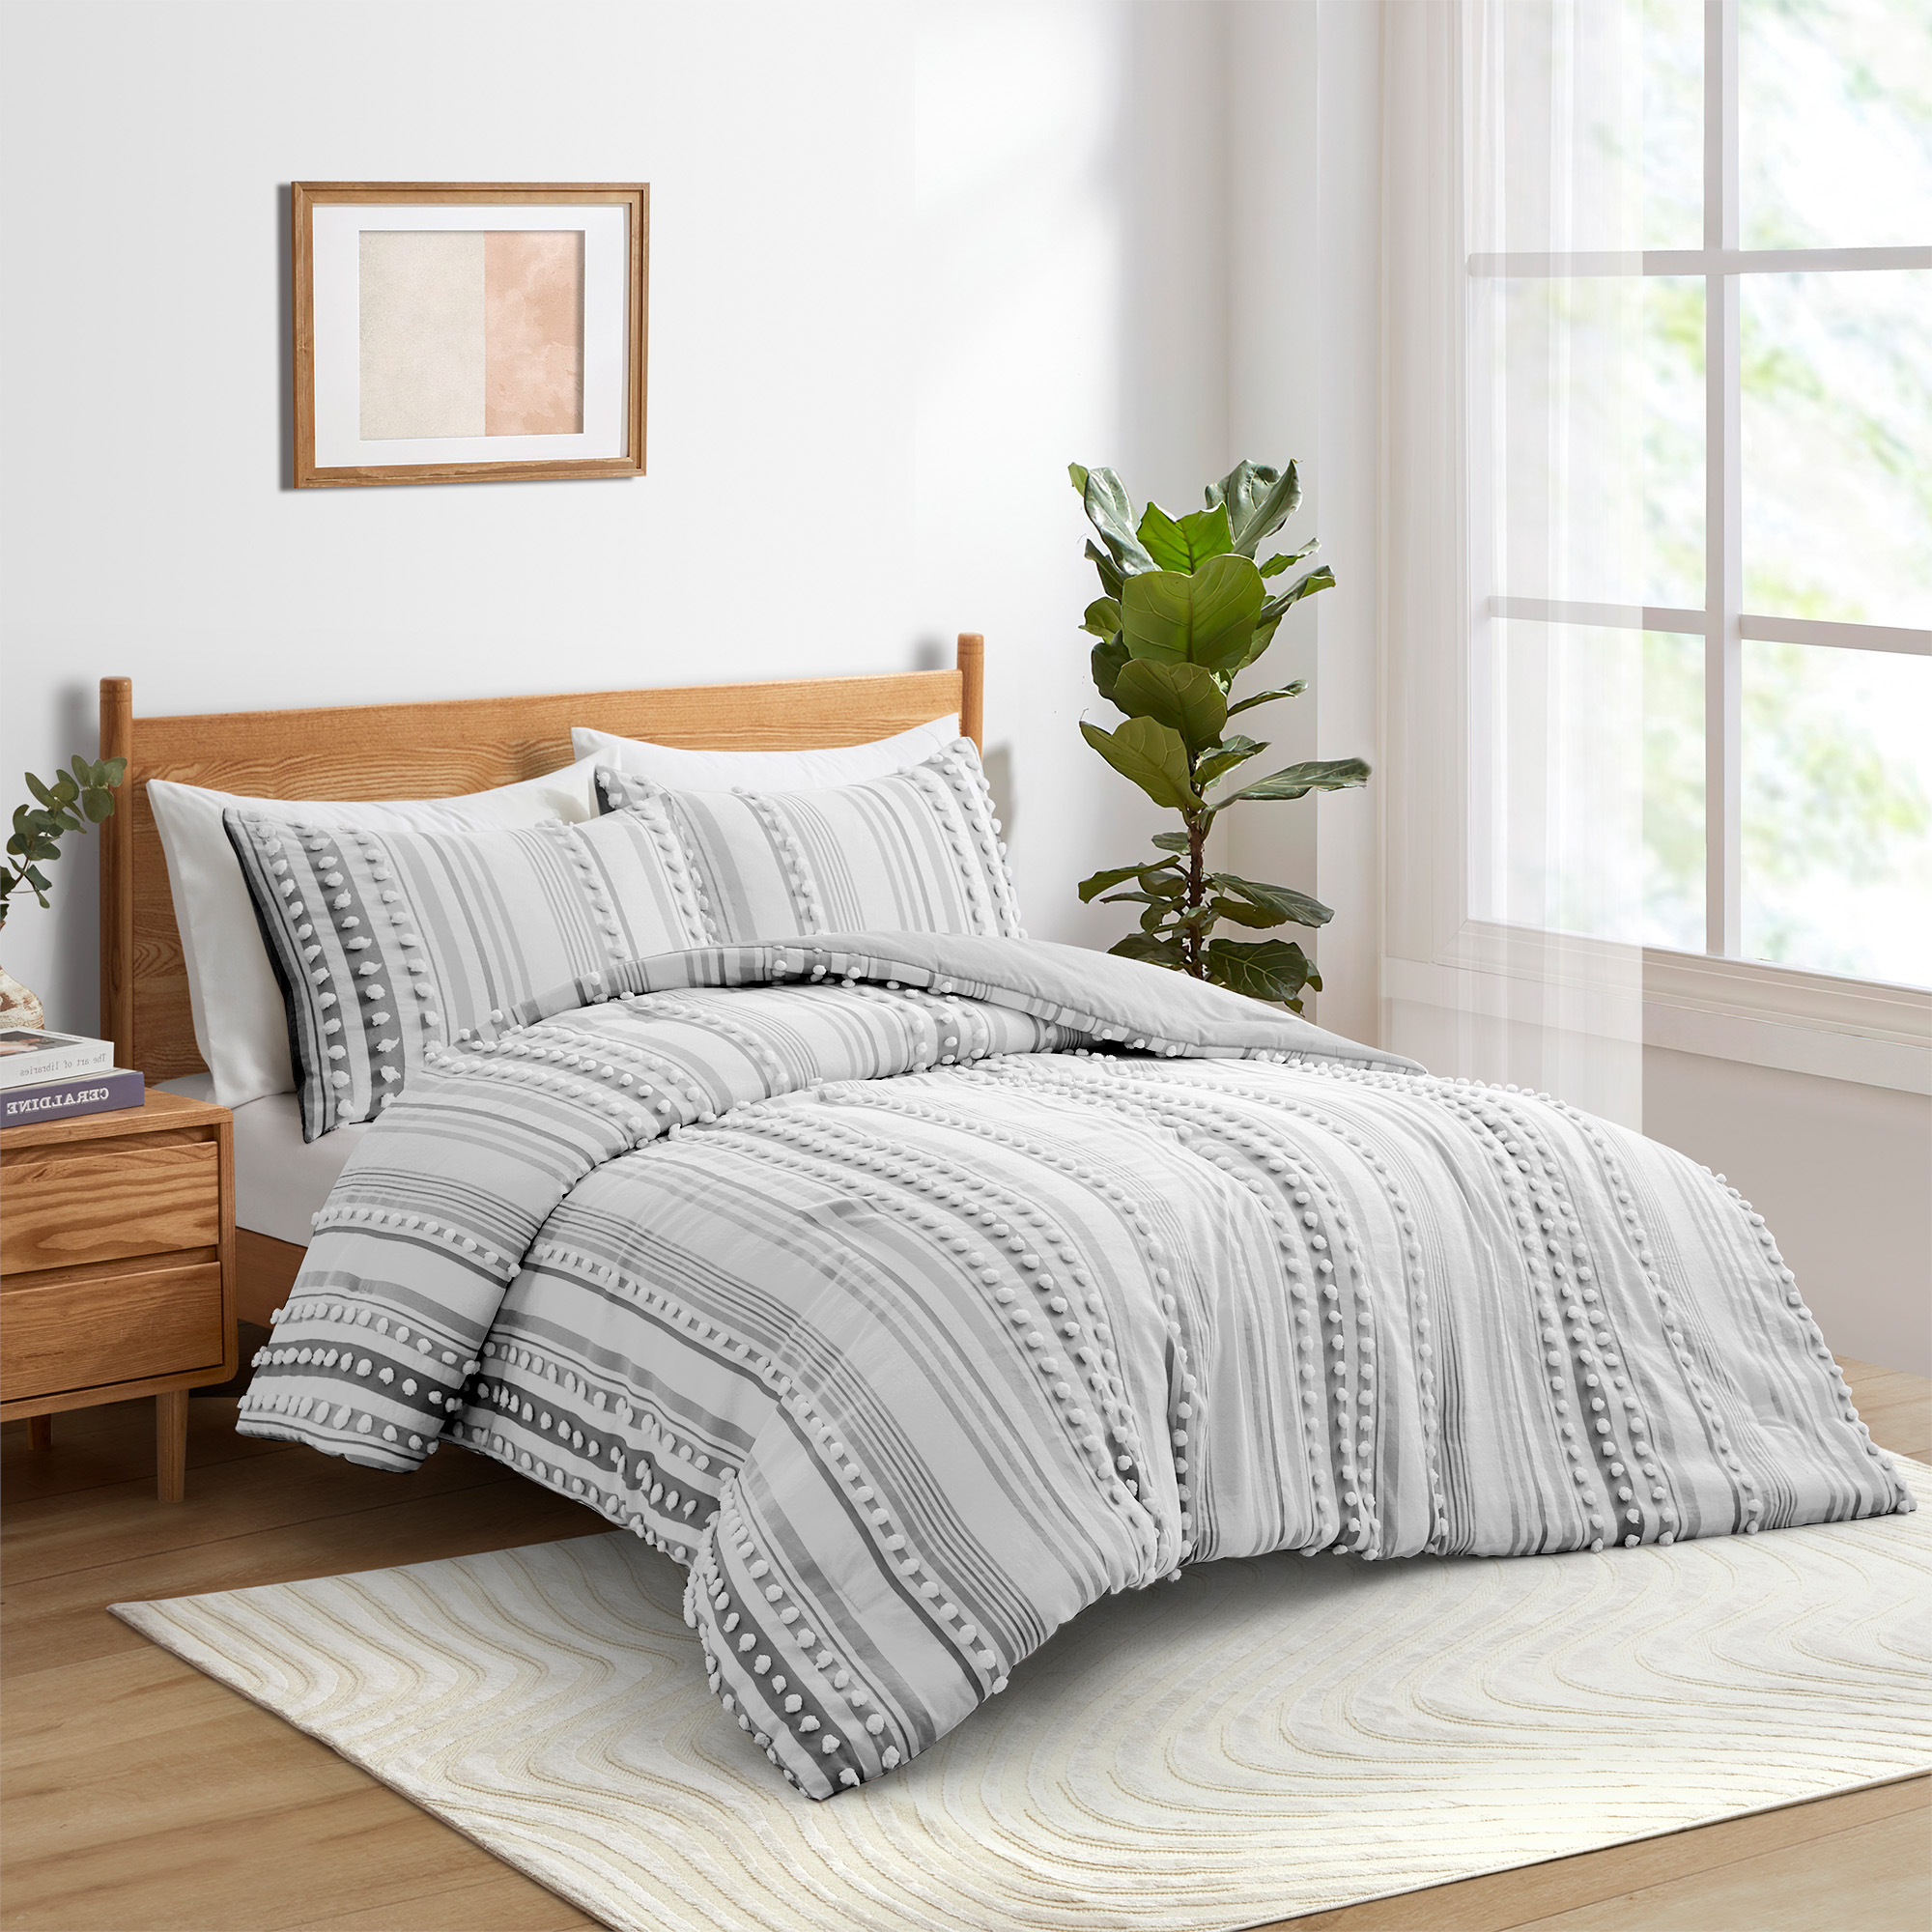 Pom Pom Textured Bed Set, All Season Soft Microfiber Complete Bedding Set For All Season Warmth - King Size